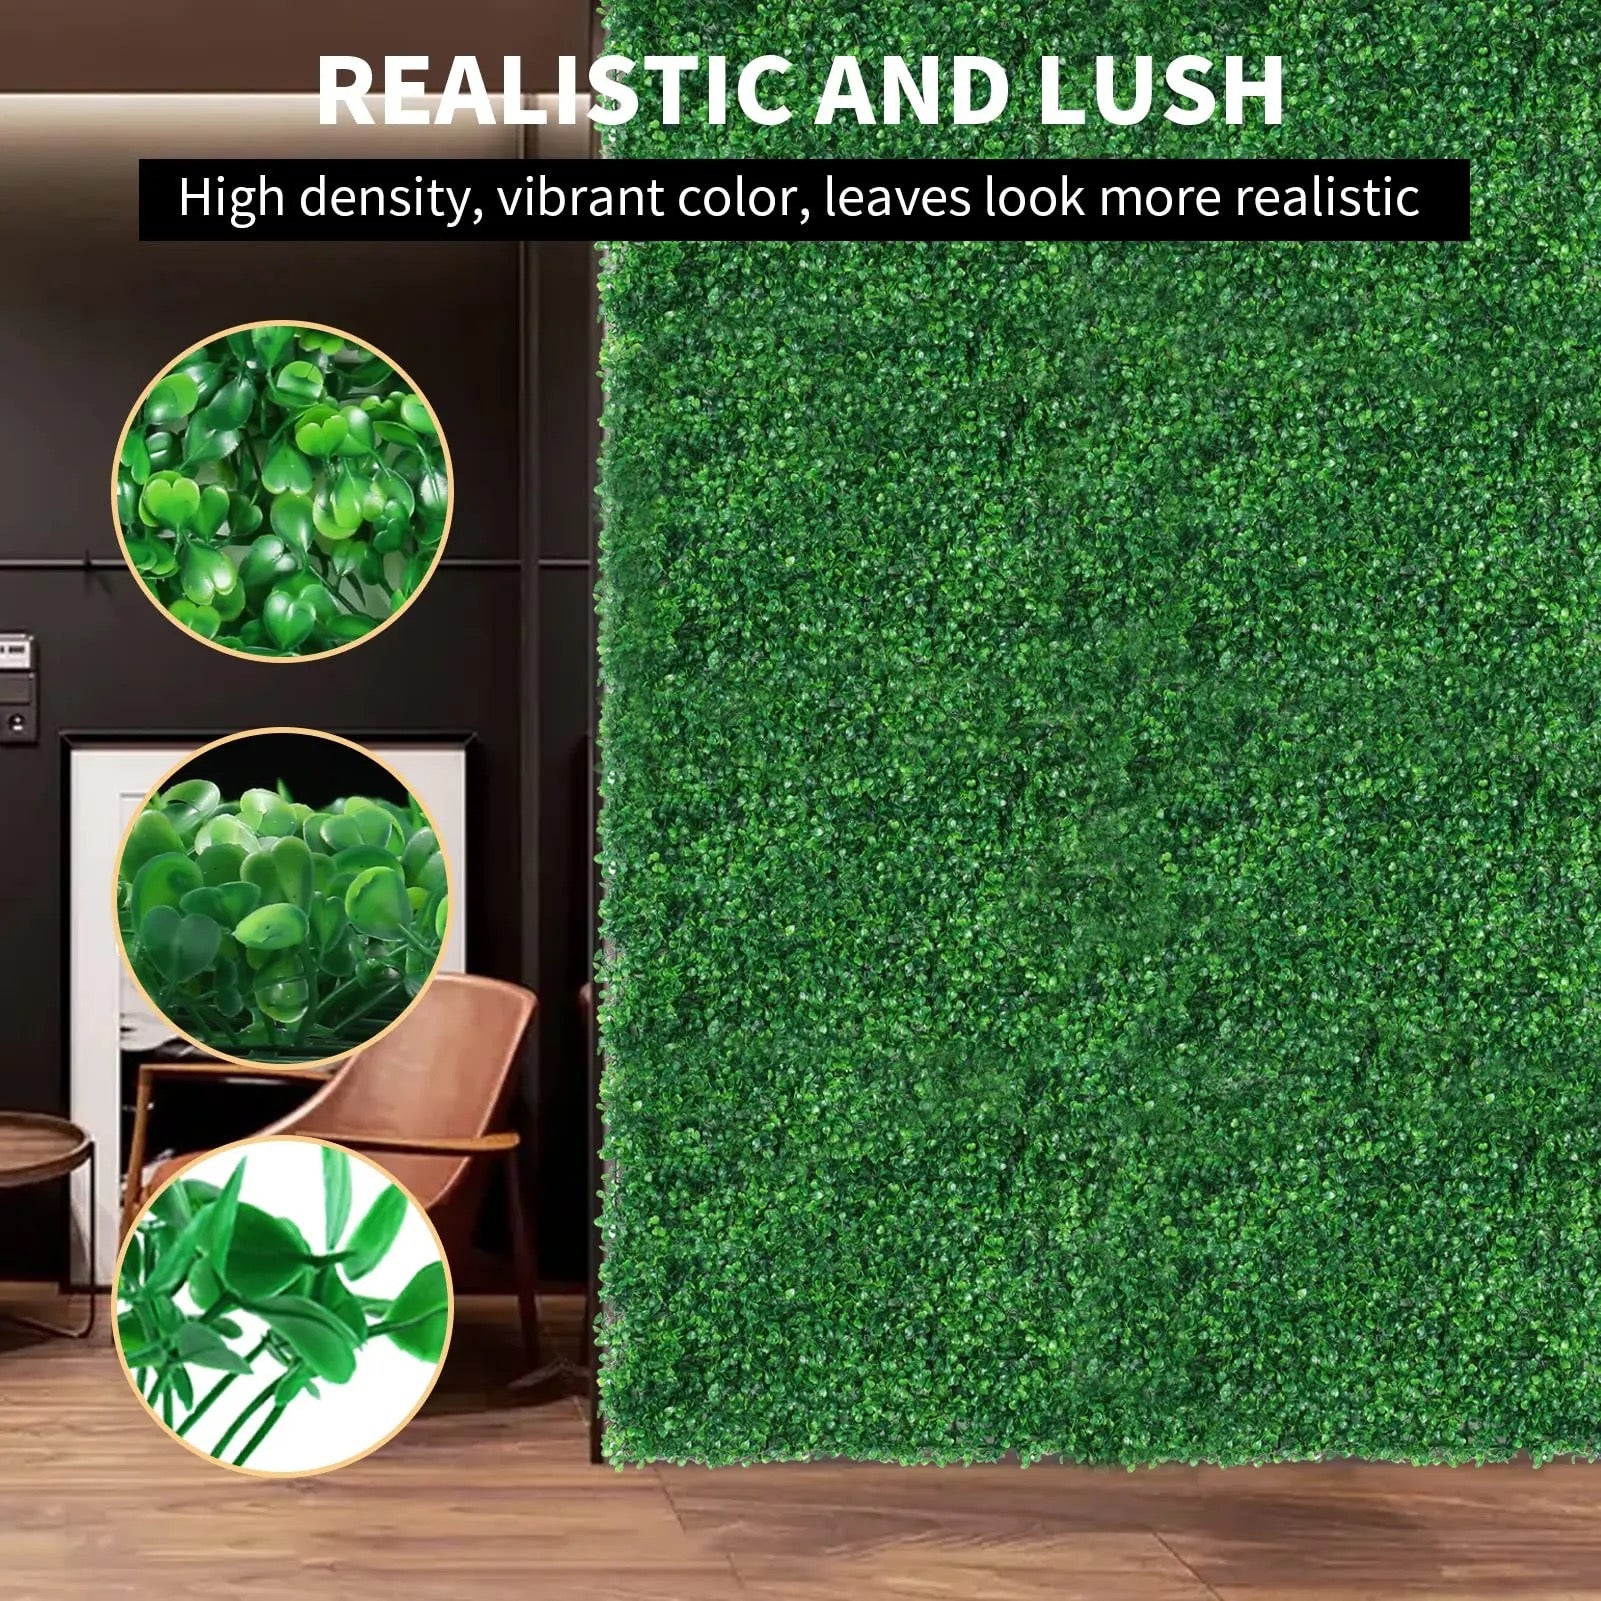 Artificial Grass Plant sticked on a wall of living room